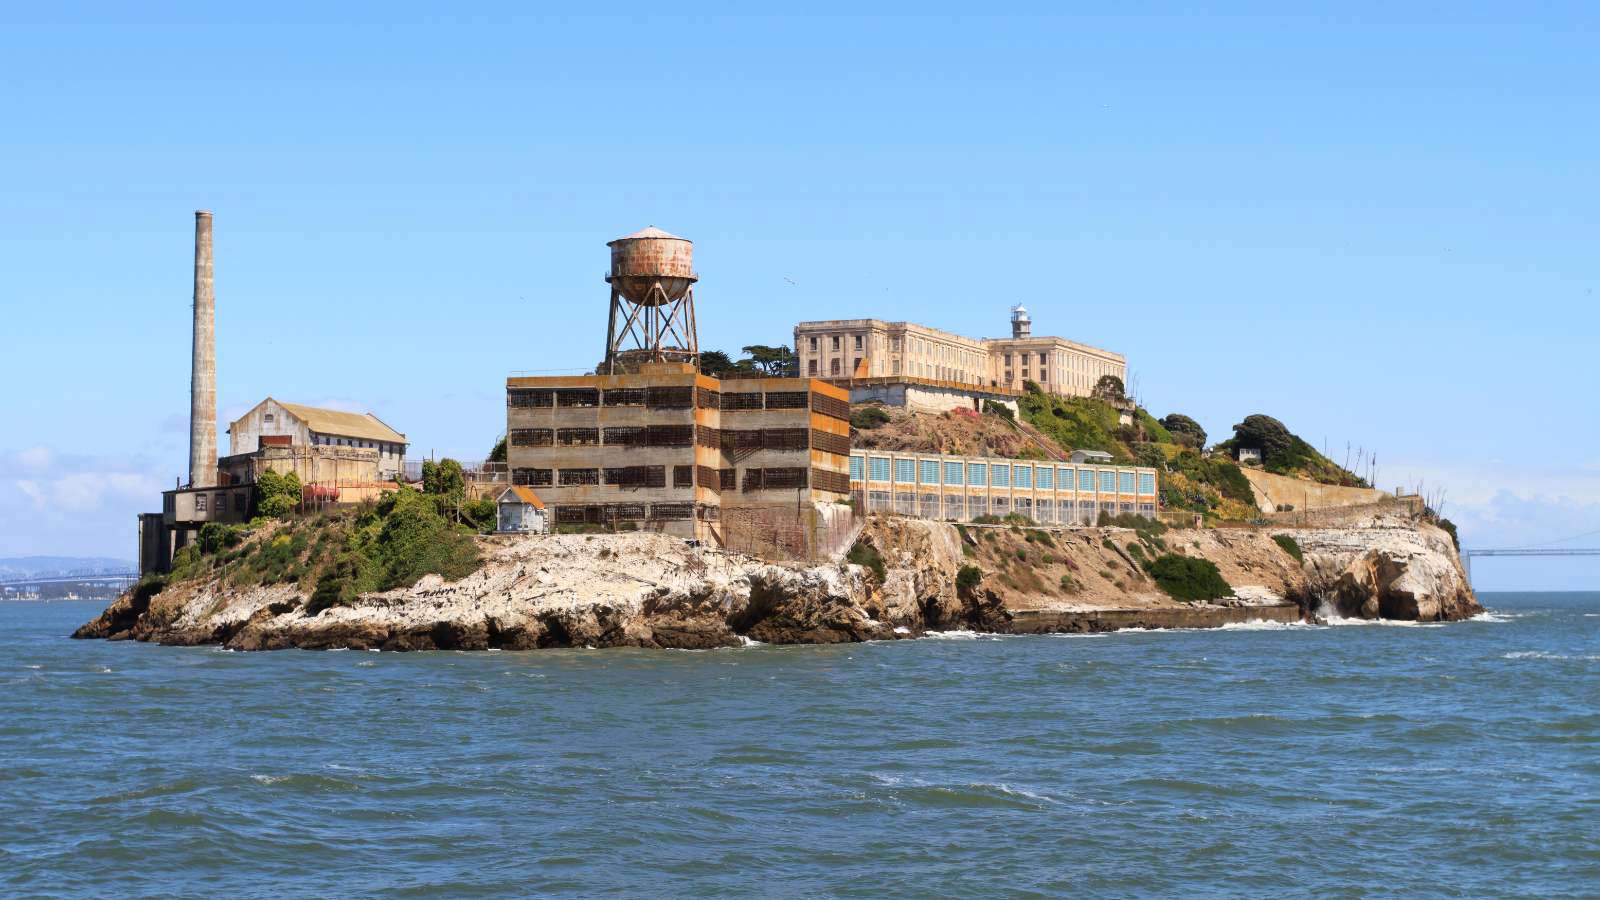 <p>Everybody knows about Alcatraz Island, the infamous federal penitentiary in San Francisco, California. It first opened its doors on August 11, 1934, and was home to some of the most notorious criminals in American history. It’s an interesting place to visit and learn about the prison’s history and the failed escape attempts.</p>